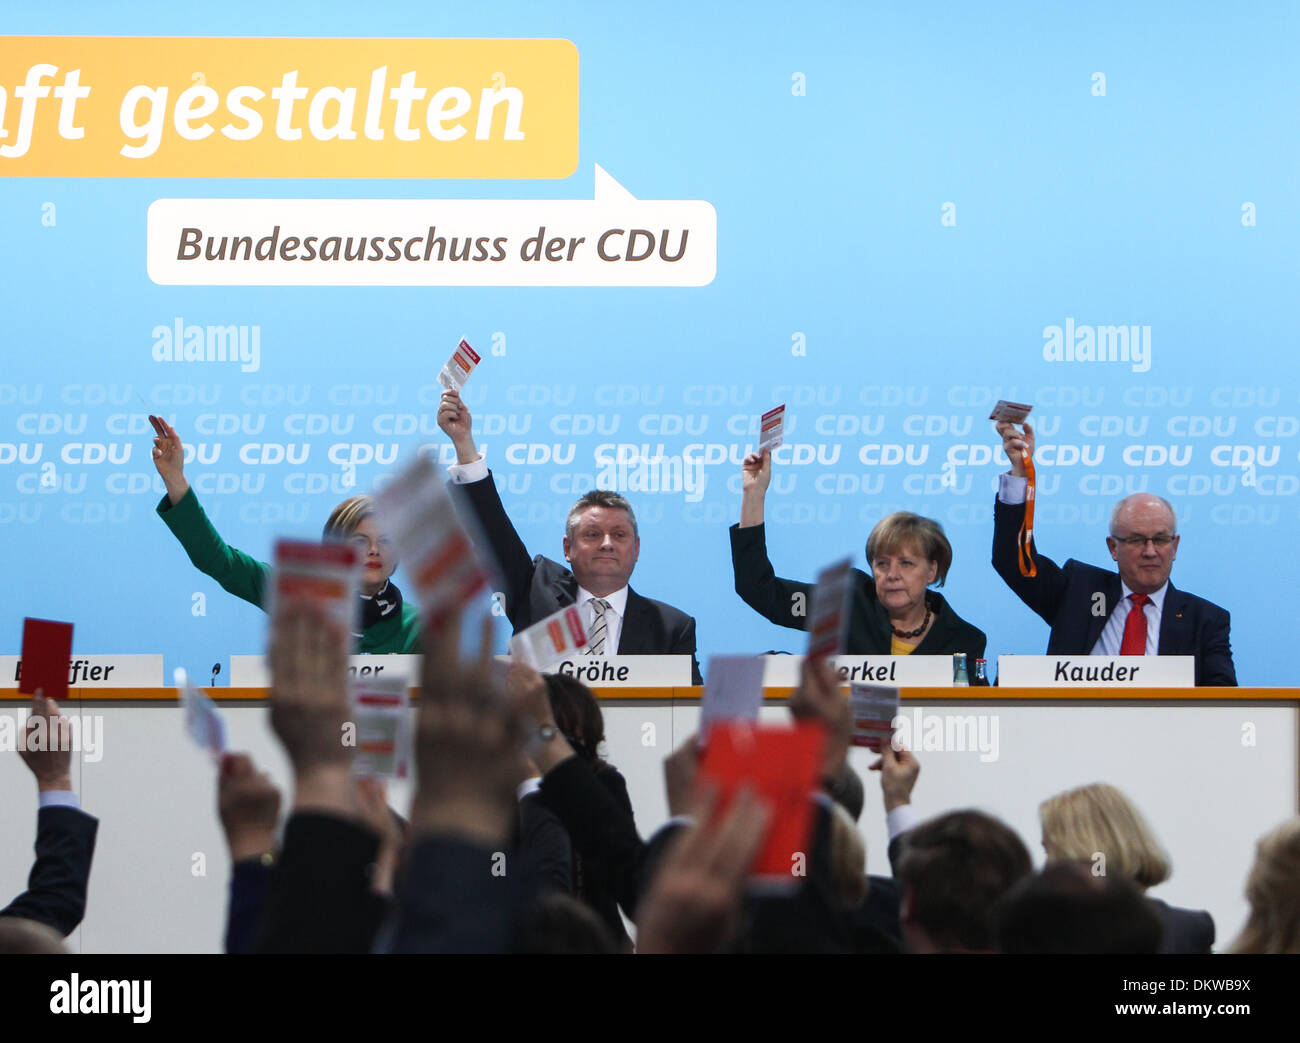 Berlin, Germany. 9th Dec, 2013. German Chancellor Angela Merkel (2nd R) votes for the coalition agreement with the Social Democratic Party (SPD) during a party conference of Germany's Christian Democratic Union (CDU) in Berlin, Germany, on Dec, 9, 2013. Angela Merkel's conservative bloc of CDU voted for the alliance with the center-left Social Democratic Party (SPD) on a small party conference on Monday. © Zhang Fan/Xinhua/Alamy Live News Stock Photo